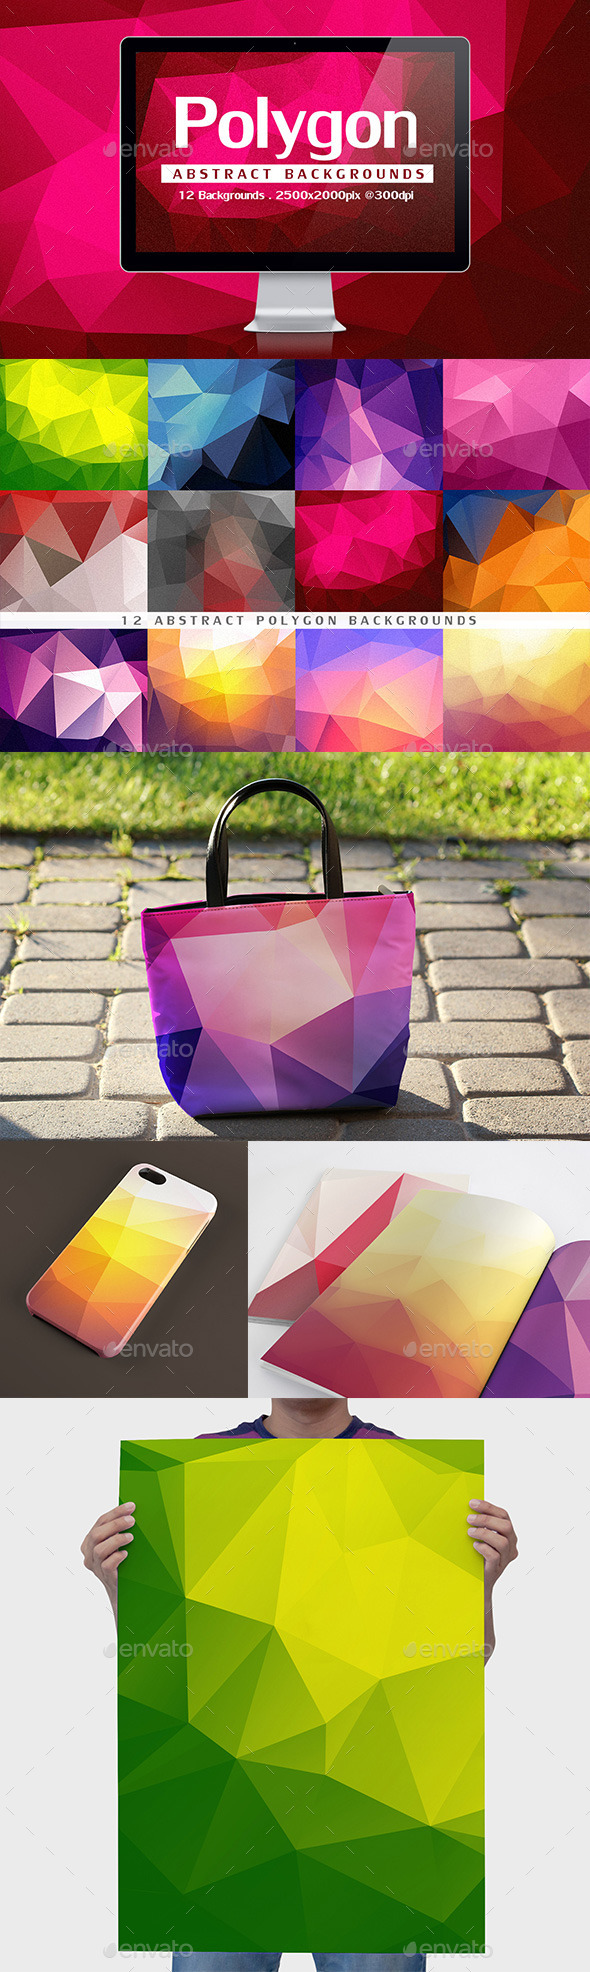 12 Abstract Polygon Backgrounds